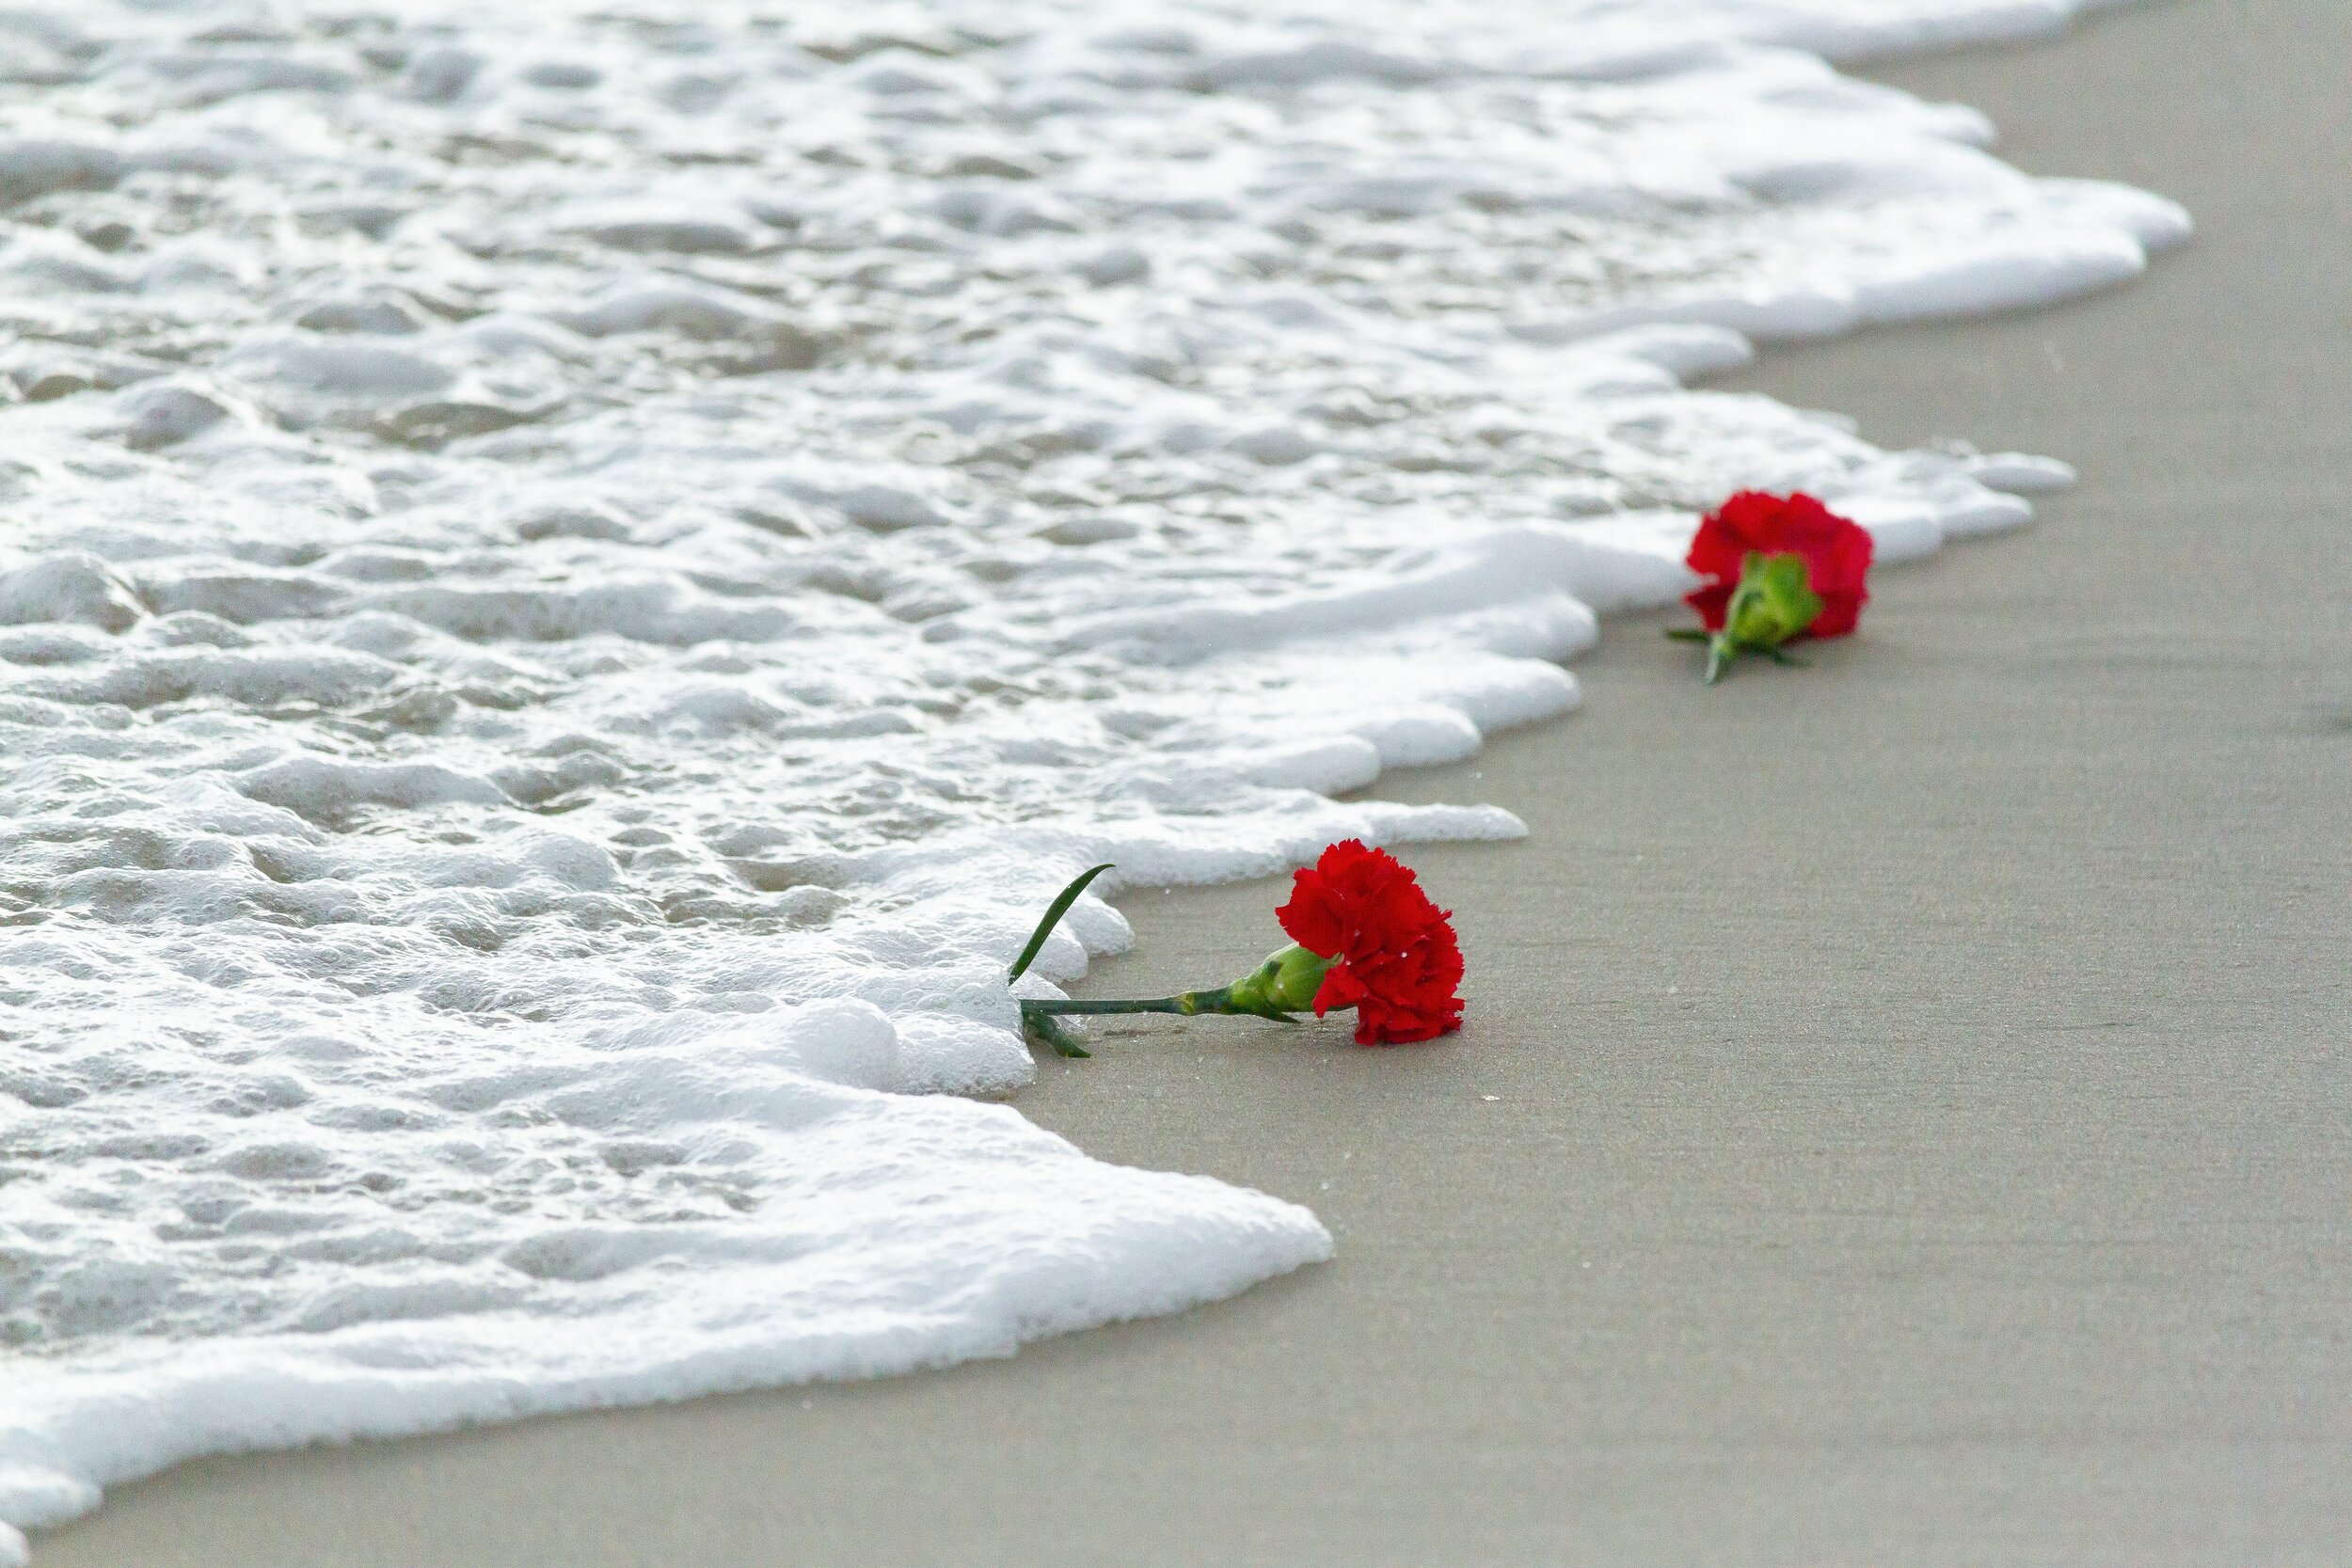   Red carnations washed ashore after friends and family tossed them in the water in remembrance of Richie Allen, a NYC firefighter who lost his life on 9/11.  